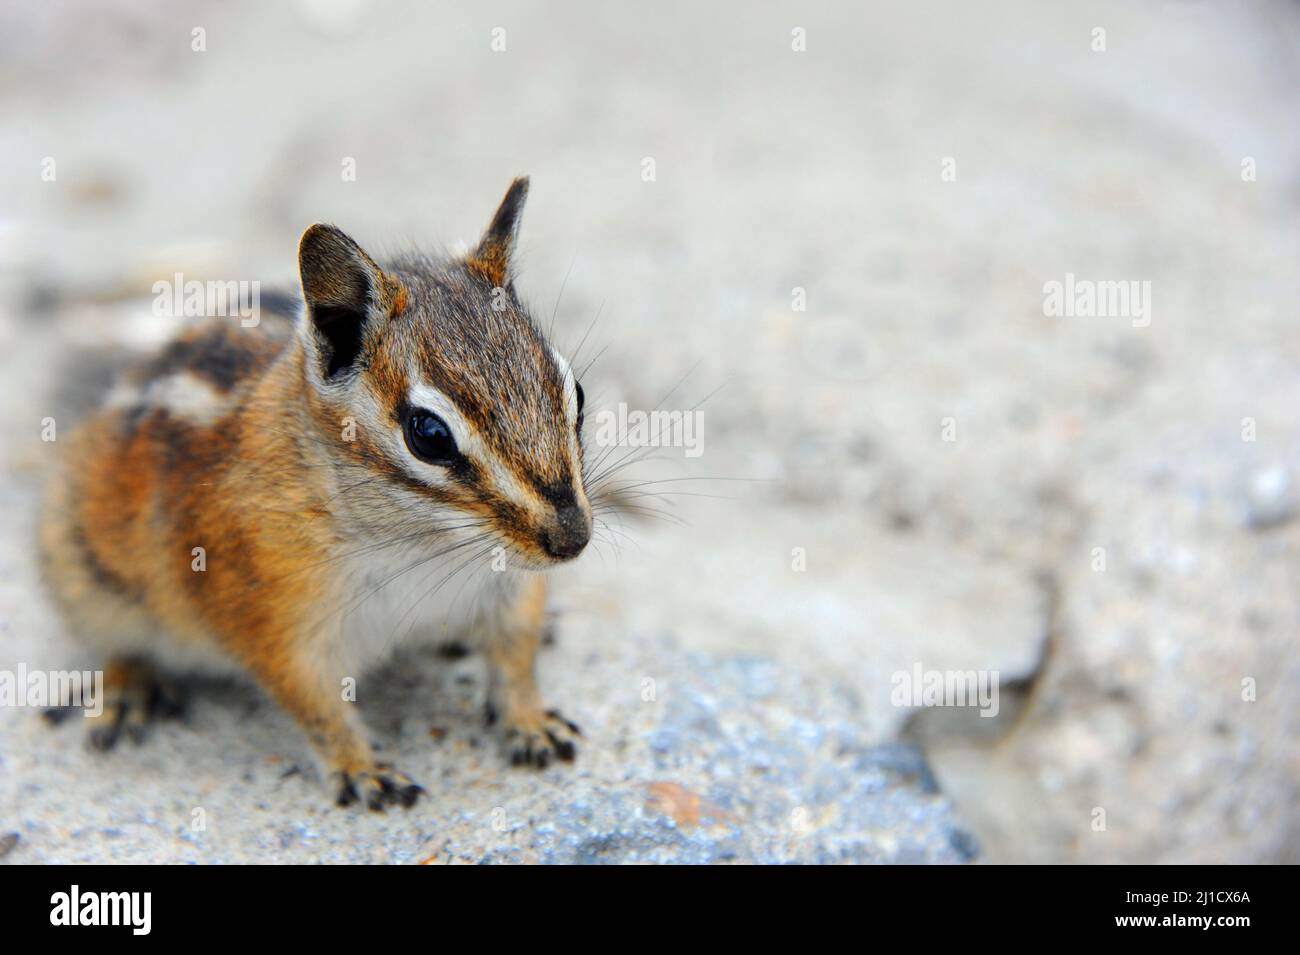 https://c8.alamy.com/comp/2J1CX6A/closeup-of-chipmunk-freezes-him-in-the-corner-of-image-chipmunk-is-crest-of-beartooth-pass-in-montana-2J1CX6A.jpg